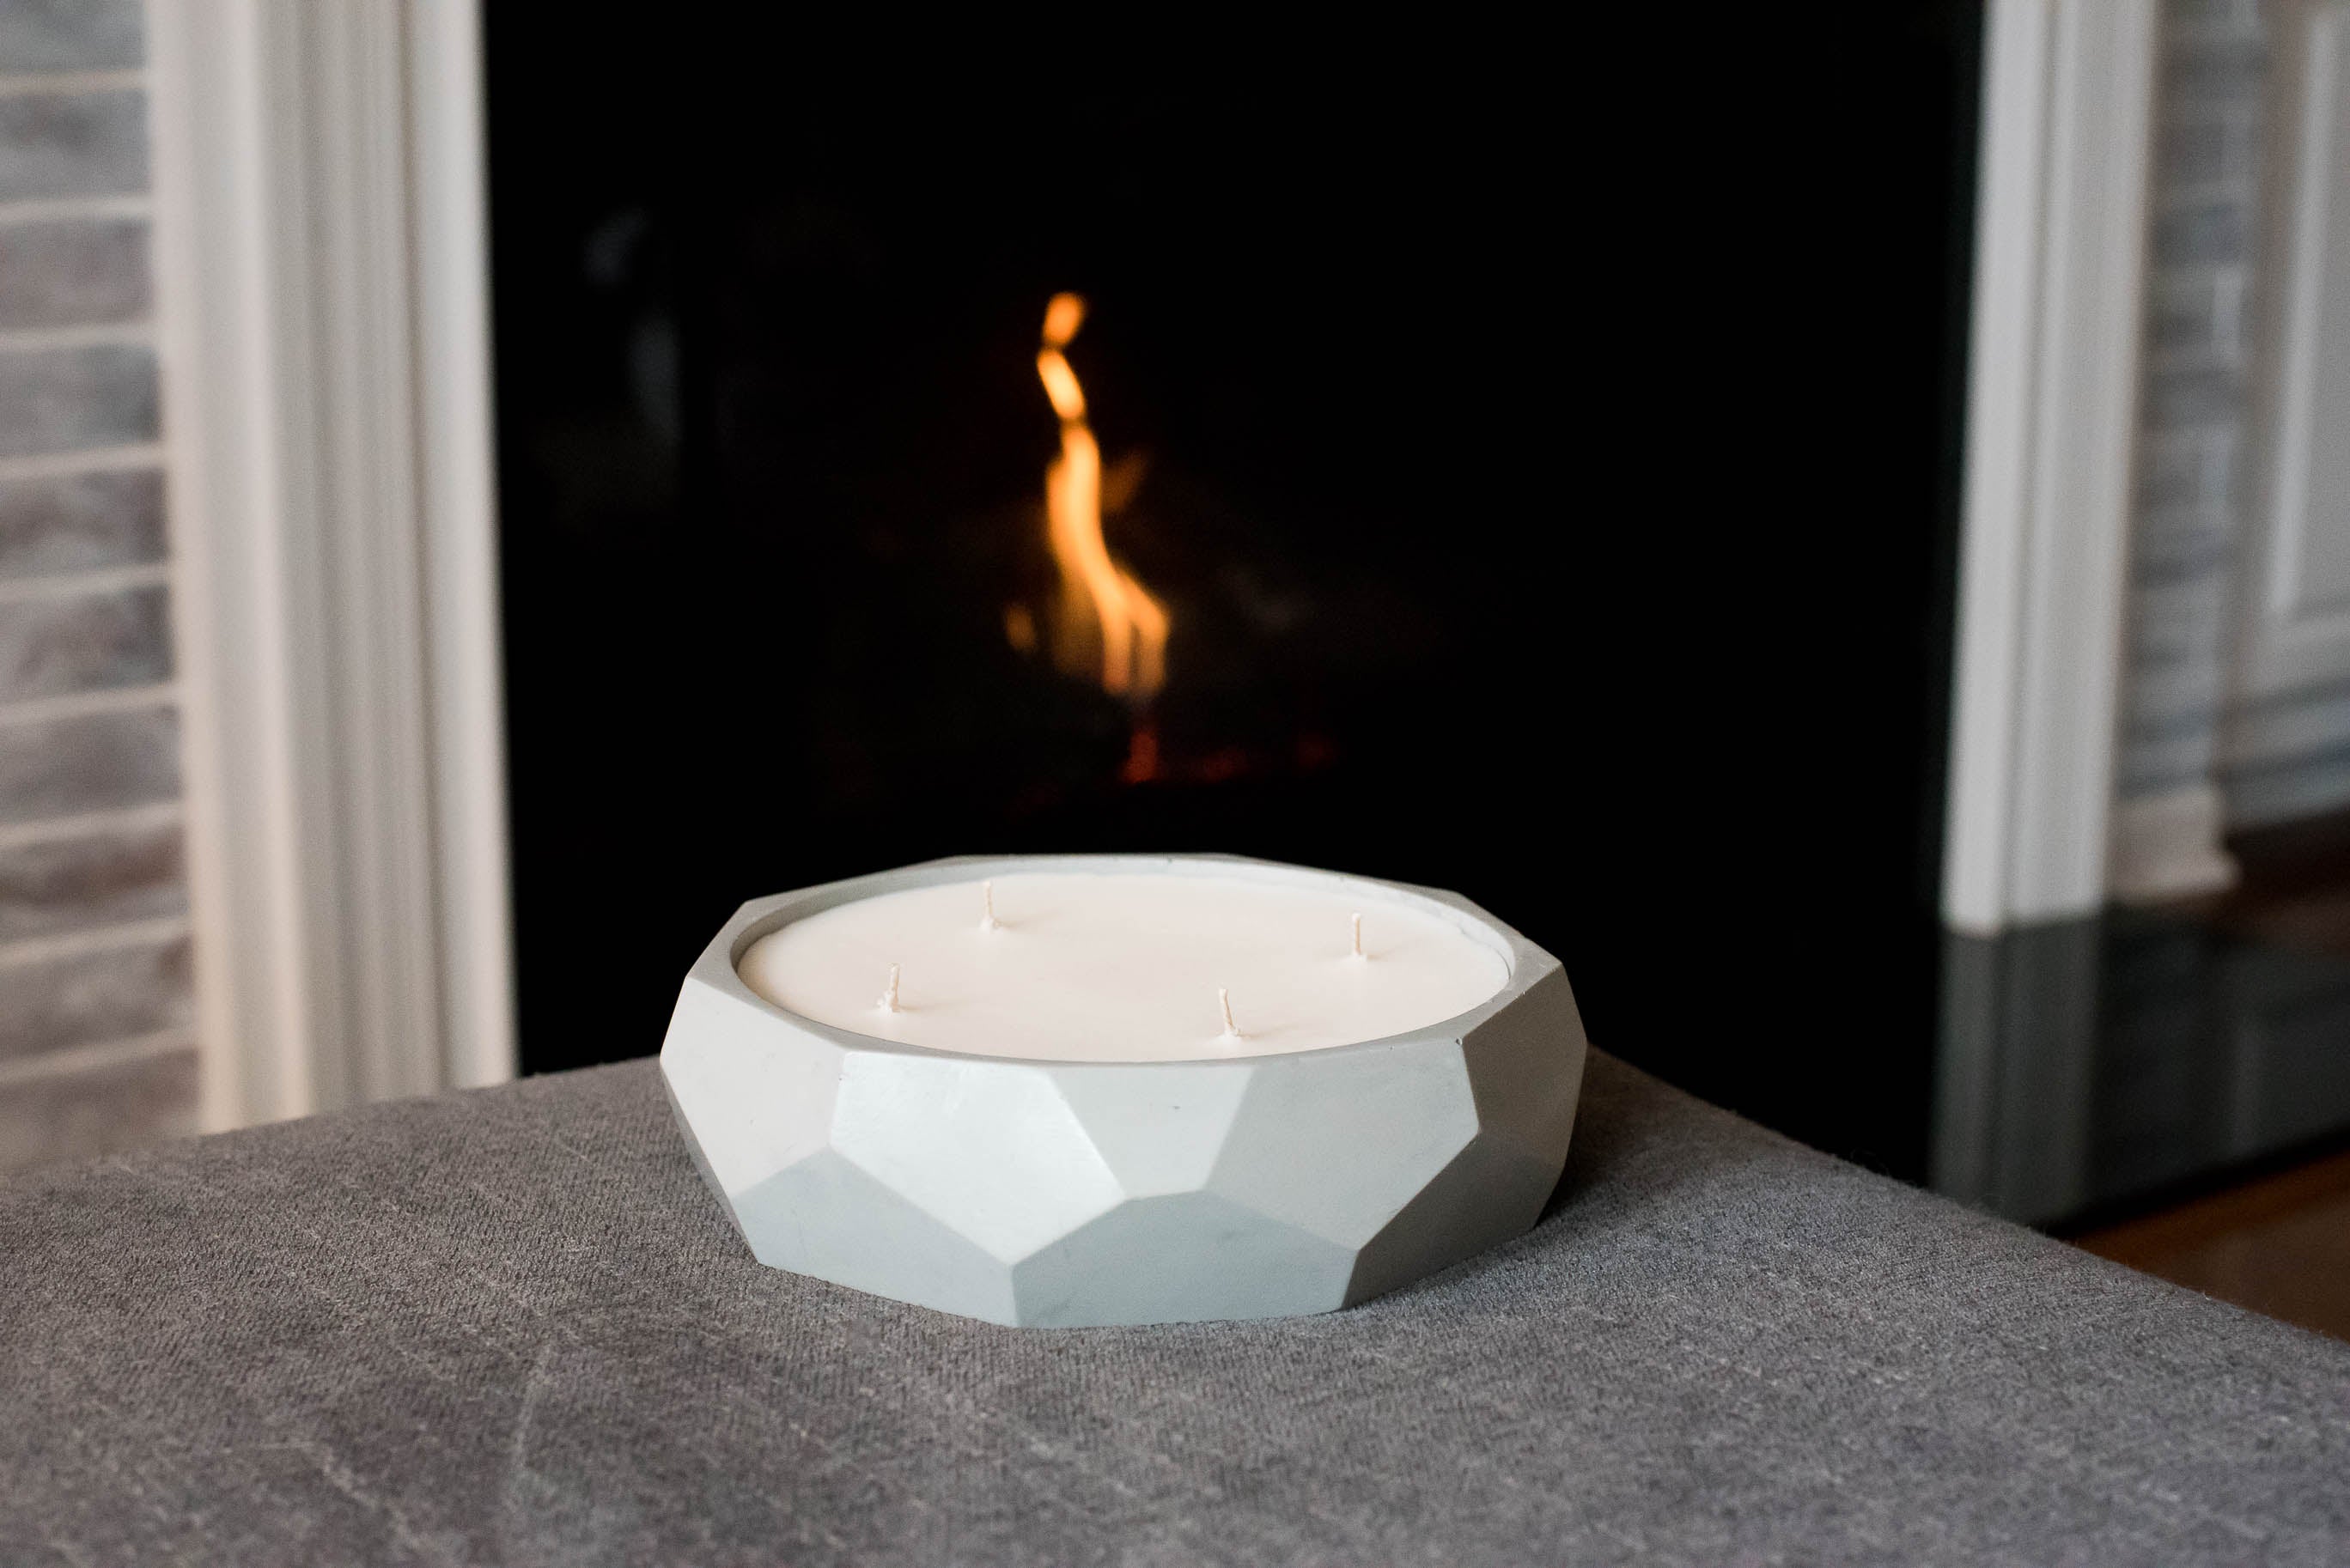 Geo Coffee Table Bowl Candle - made by kippen